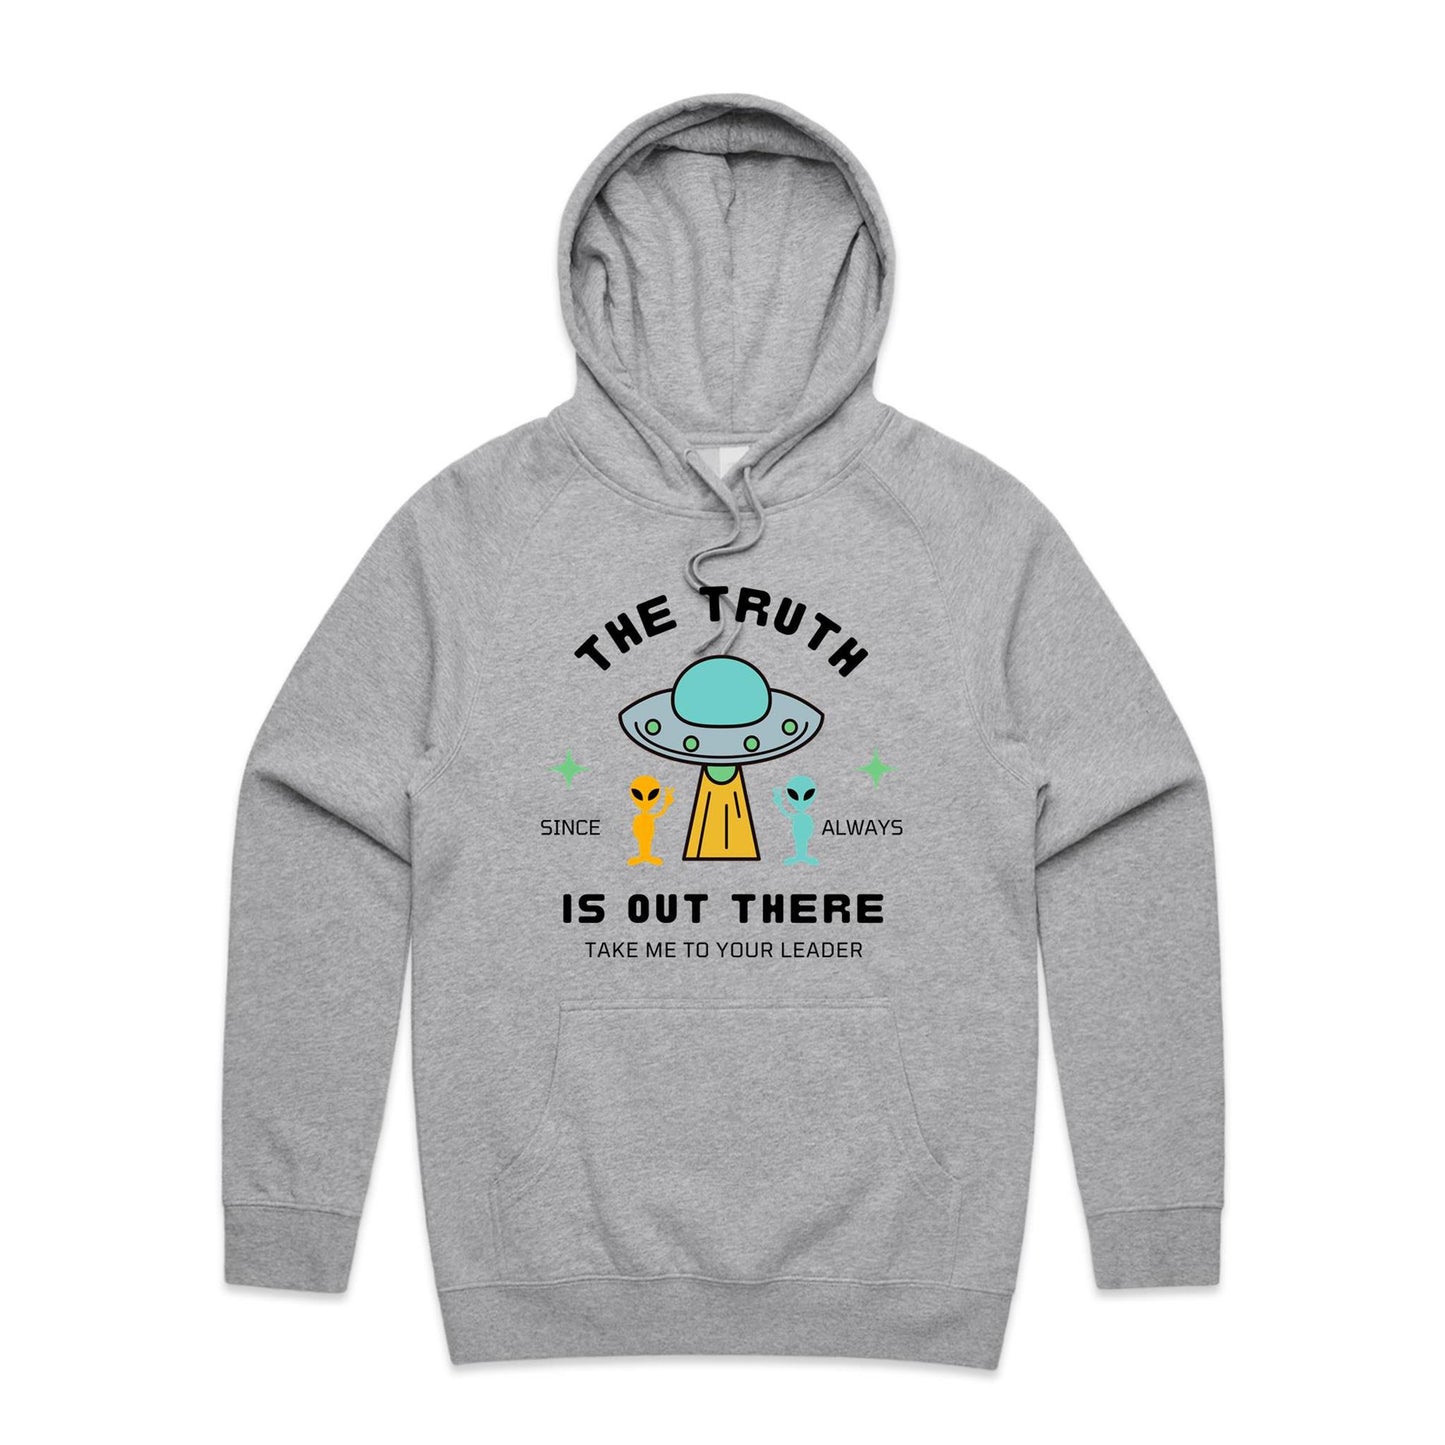 The Truth Is Out There - Supply Hood Grey Marle Mens Supply Hoodie Sci Fi